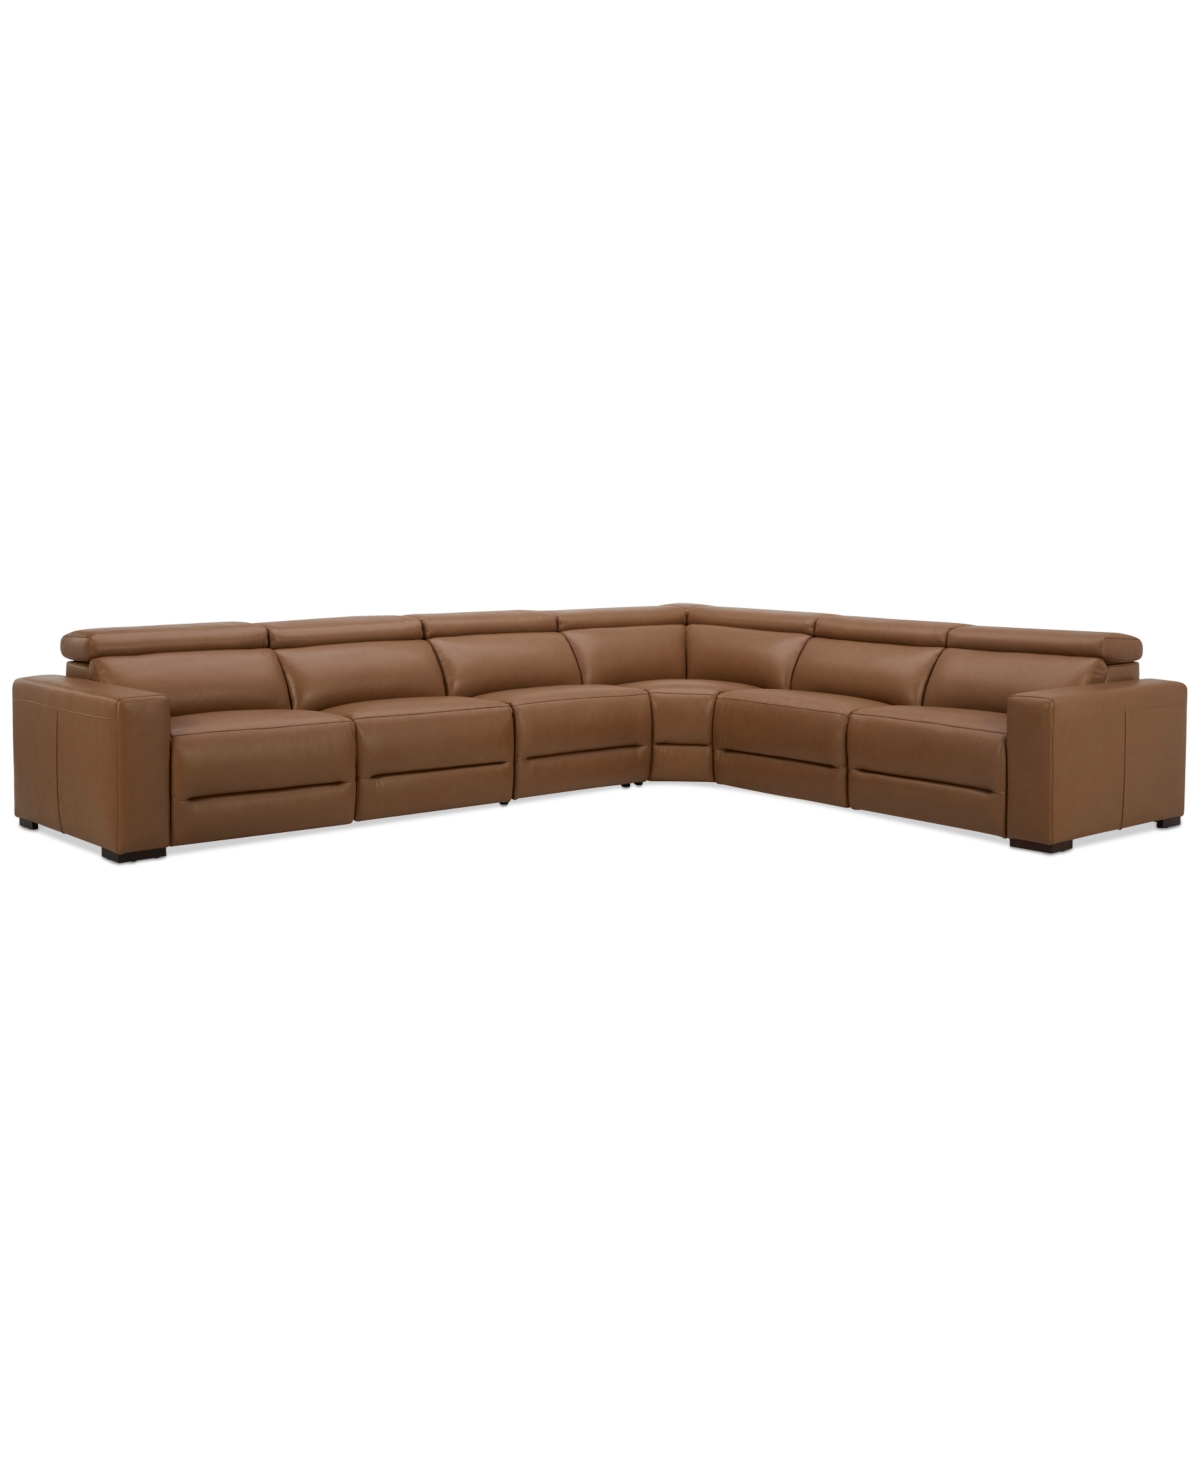 Macy's Nevio 157" 6-pc. Leather Sectional With 2 Power Recliners And Headrests, Created For  In Butternut